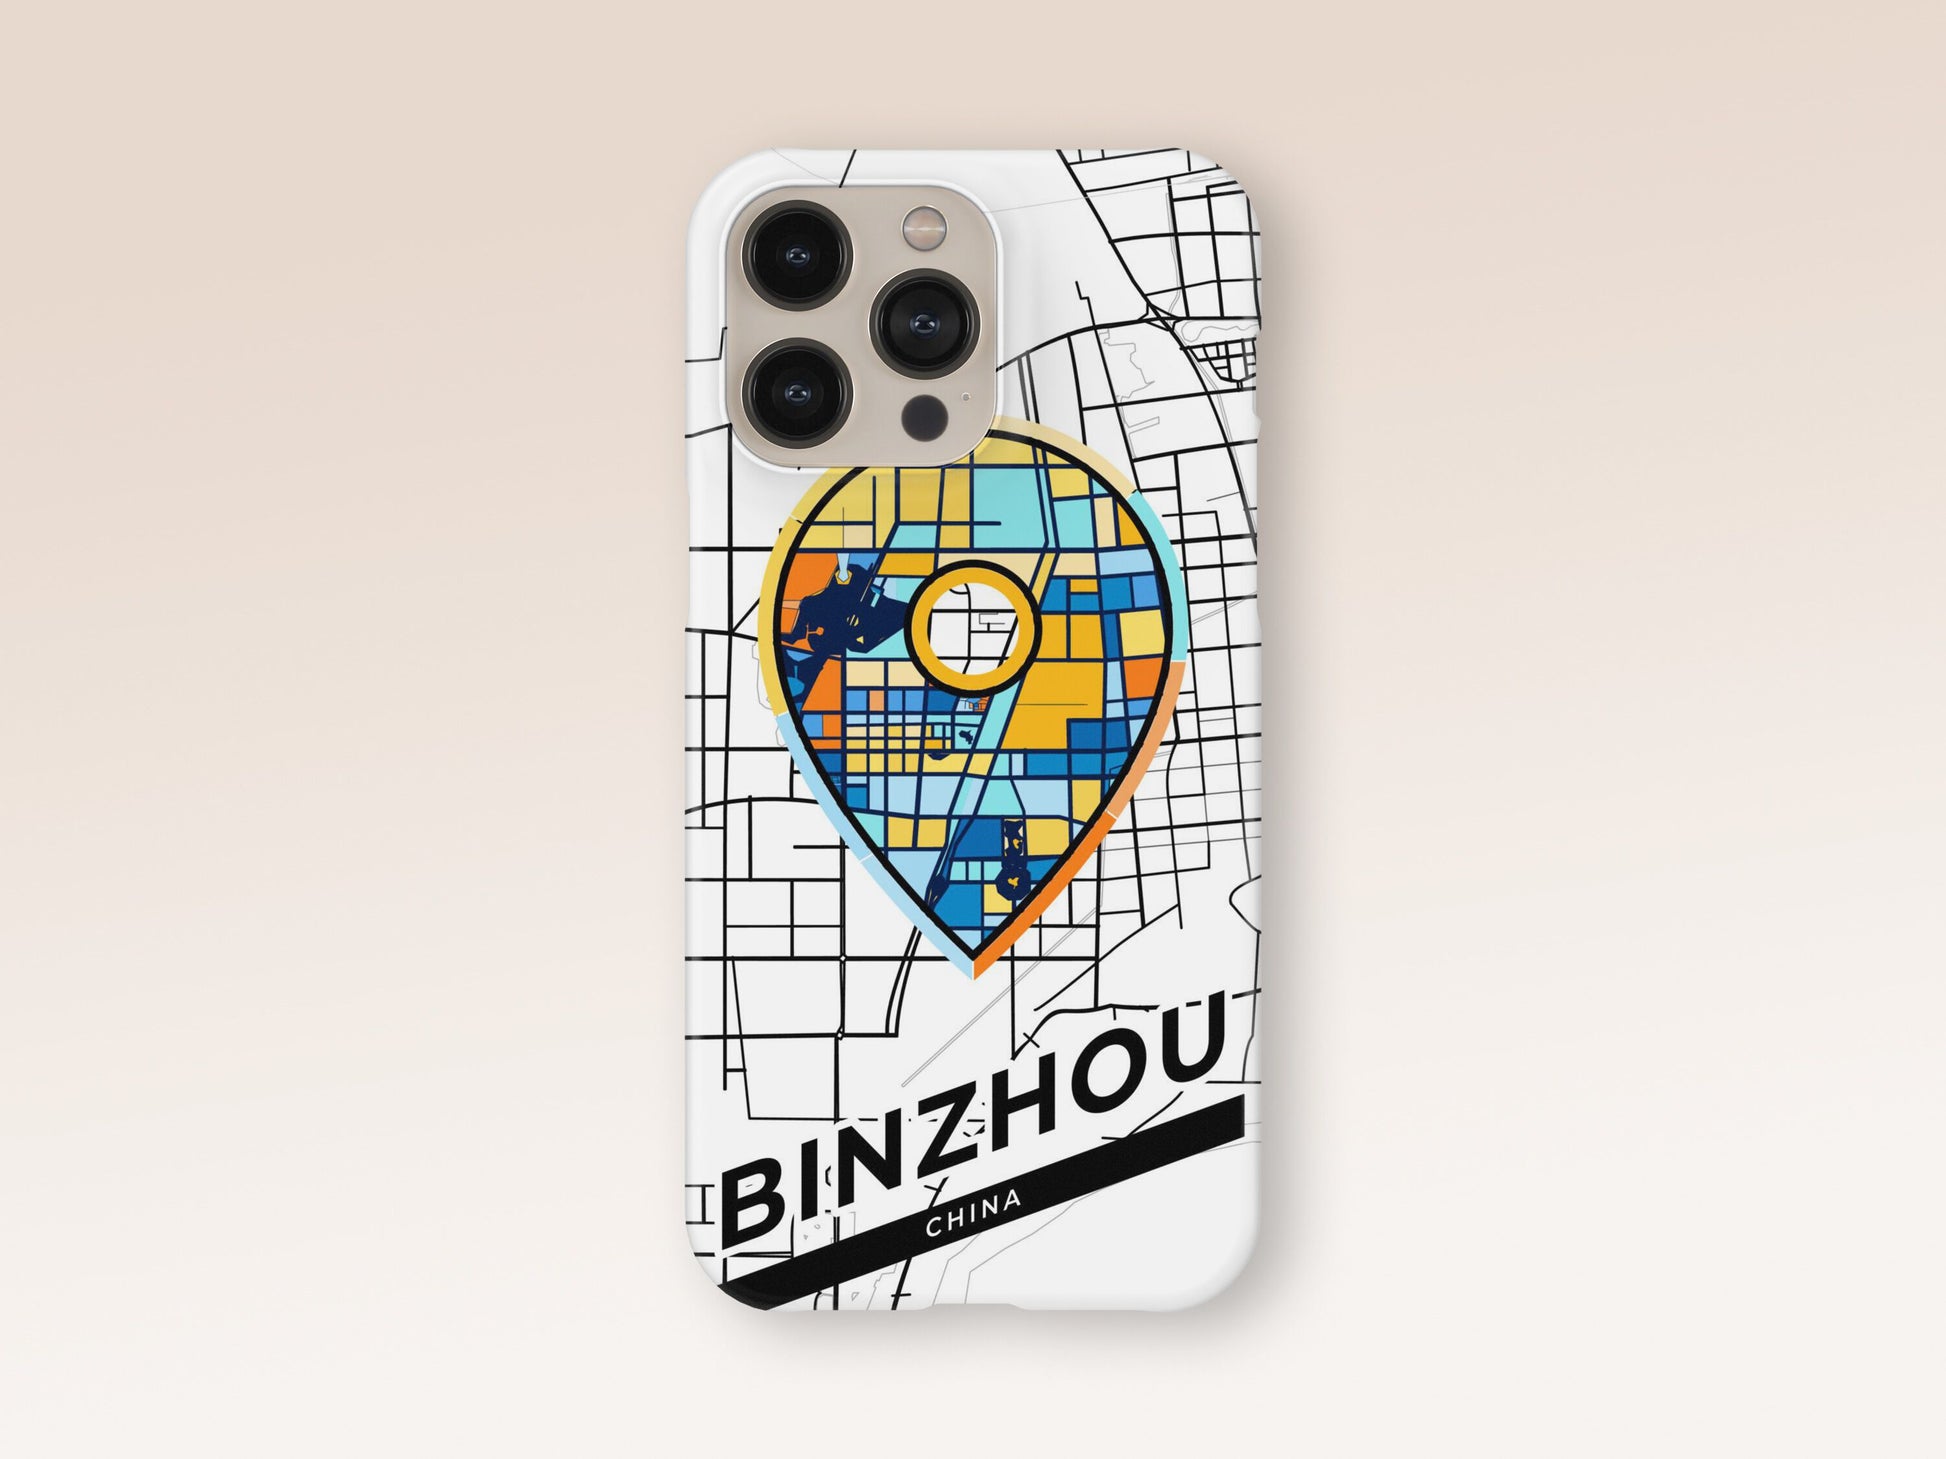 Binzhou China slim phone case with colorful icon. Birthday, wedding or housewarming gift. Couple match cases. 1